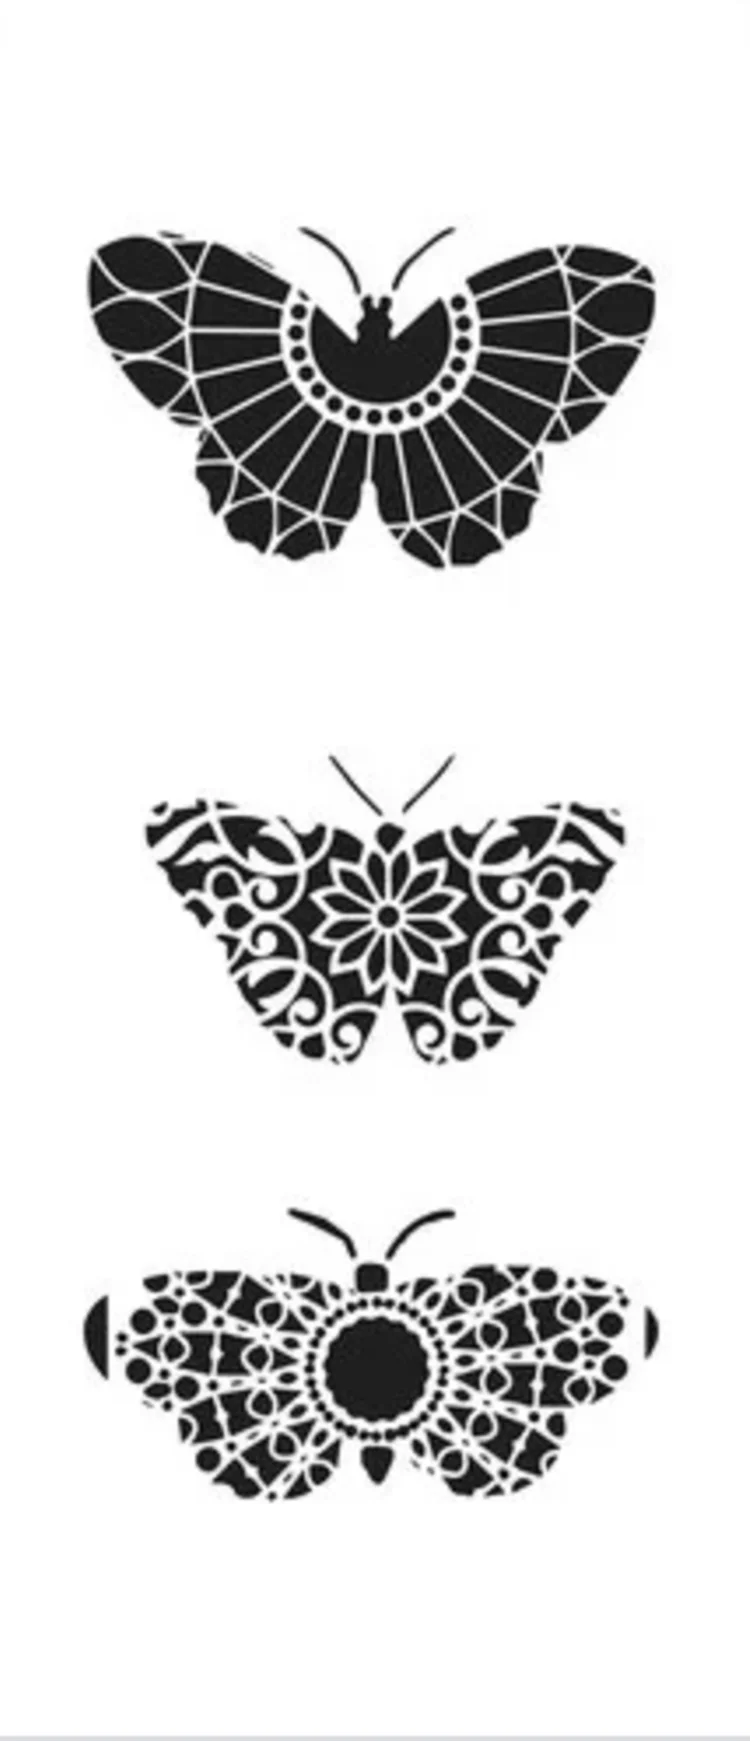 

Slimline - Monarch Trio New For 2021 Metal Cutting Stencil Diary Scrapbooking Easter Craft Engraving Making DIY Greeting Card